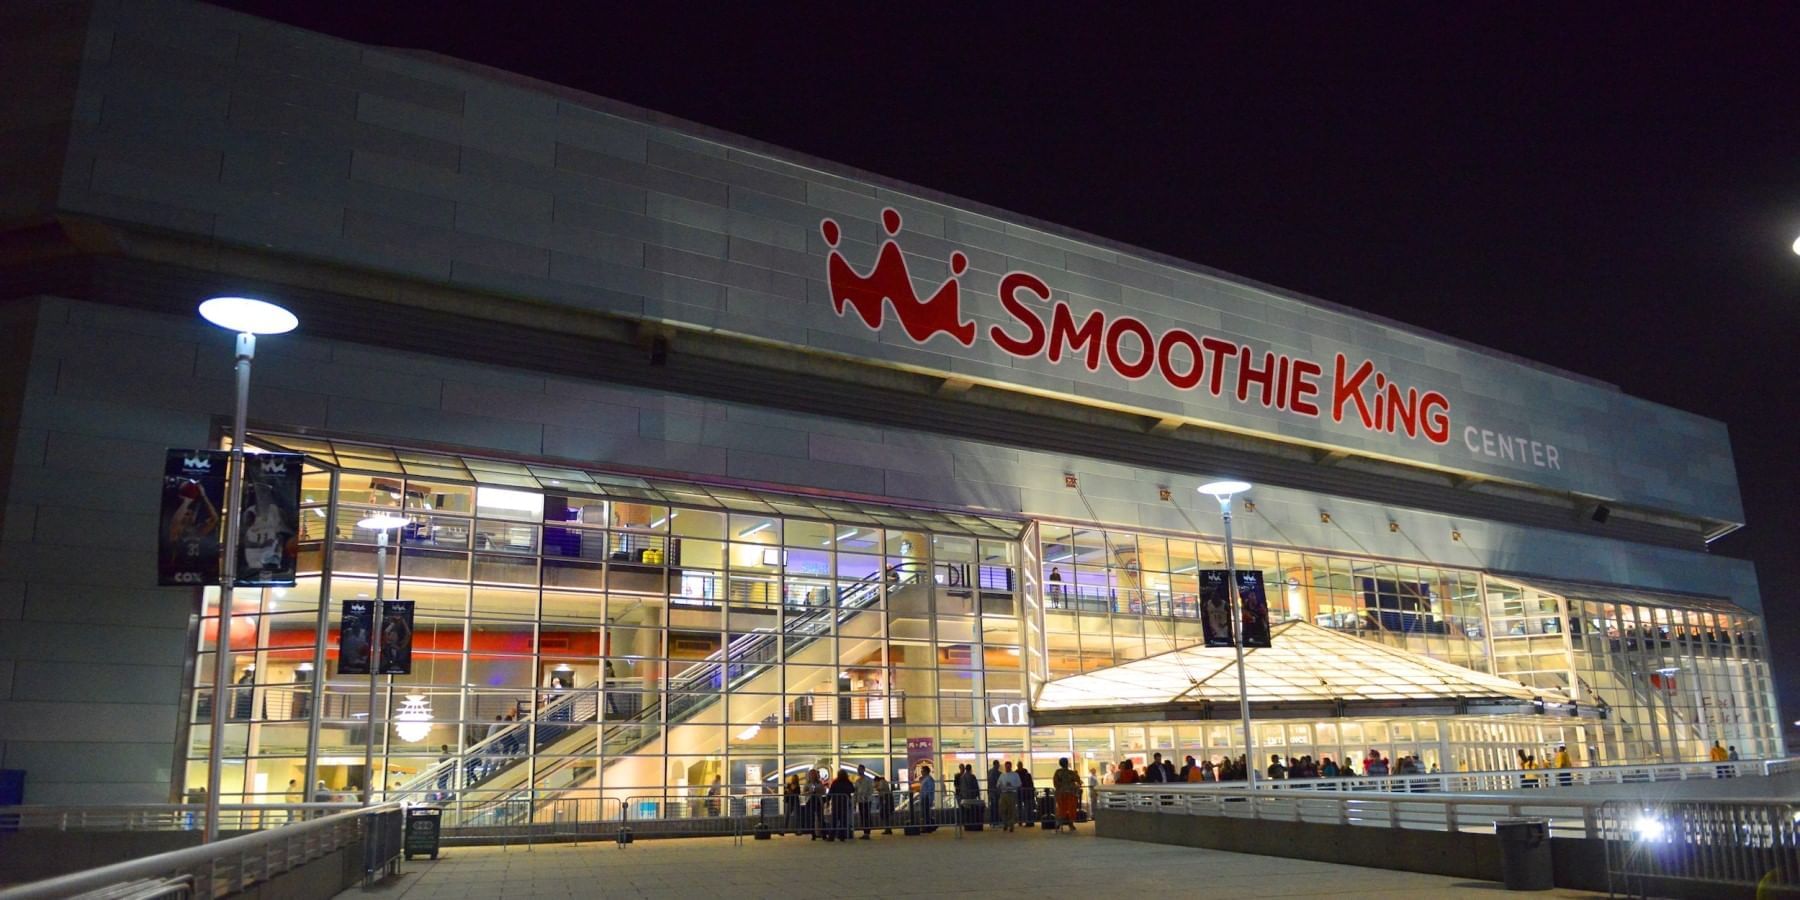 The Smoothie King Center in New Orleans Editorial Stock Image